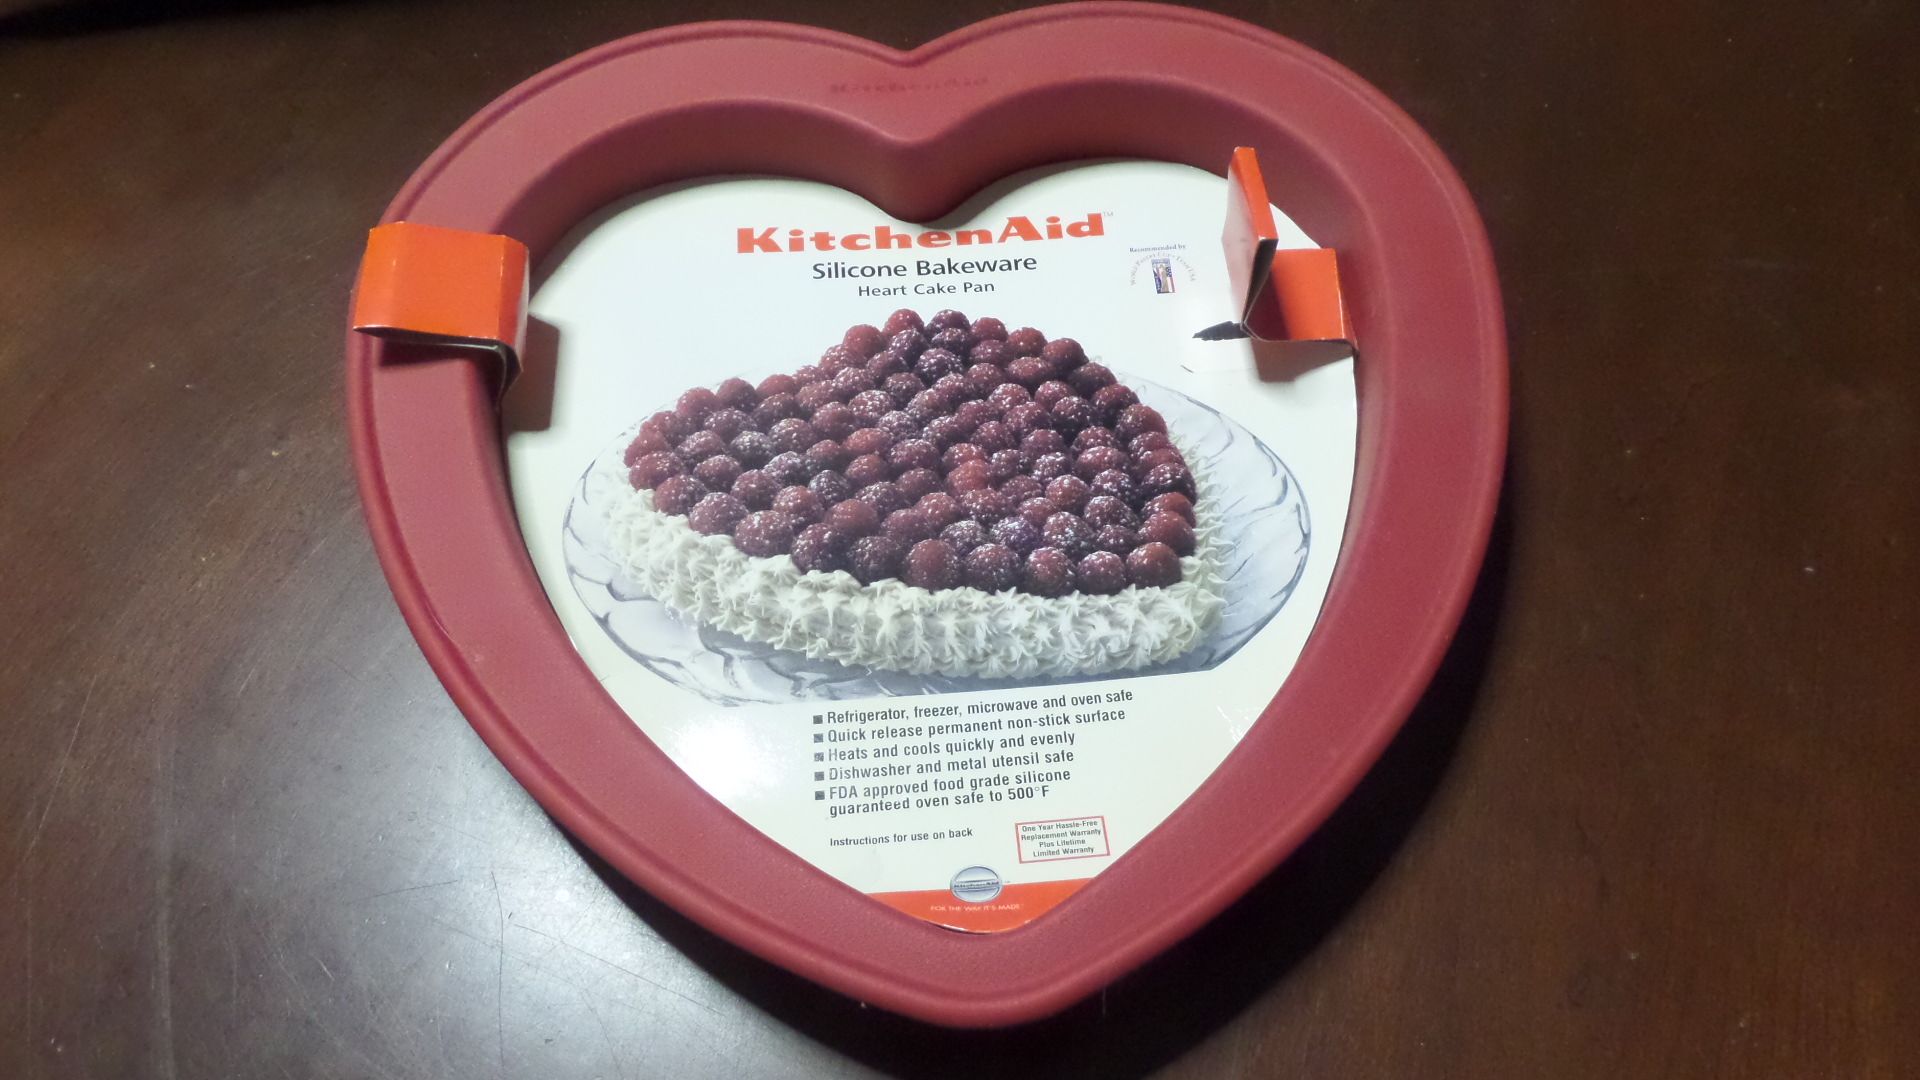 Kitchen Aid Red Silicone Heart-Shaped Pan